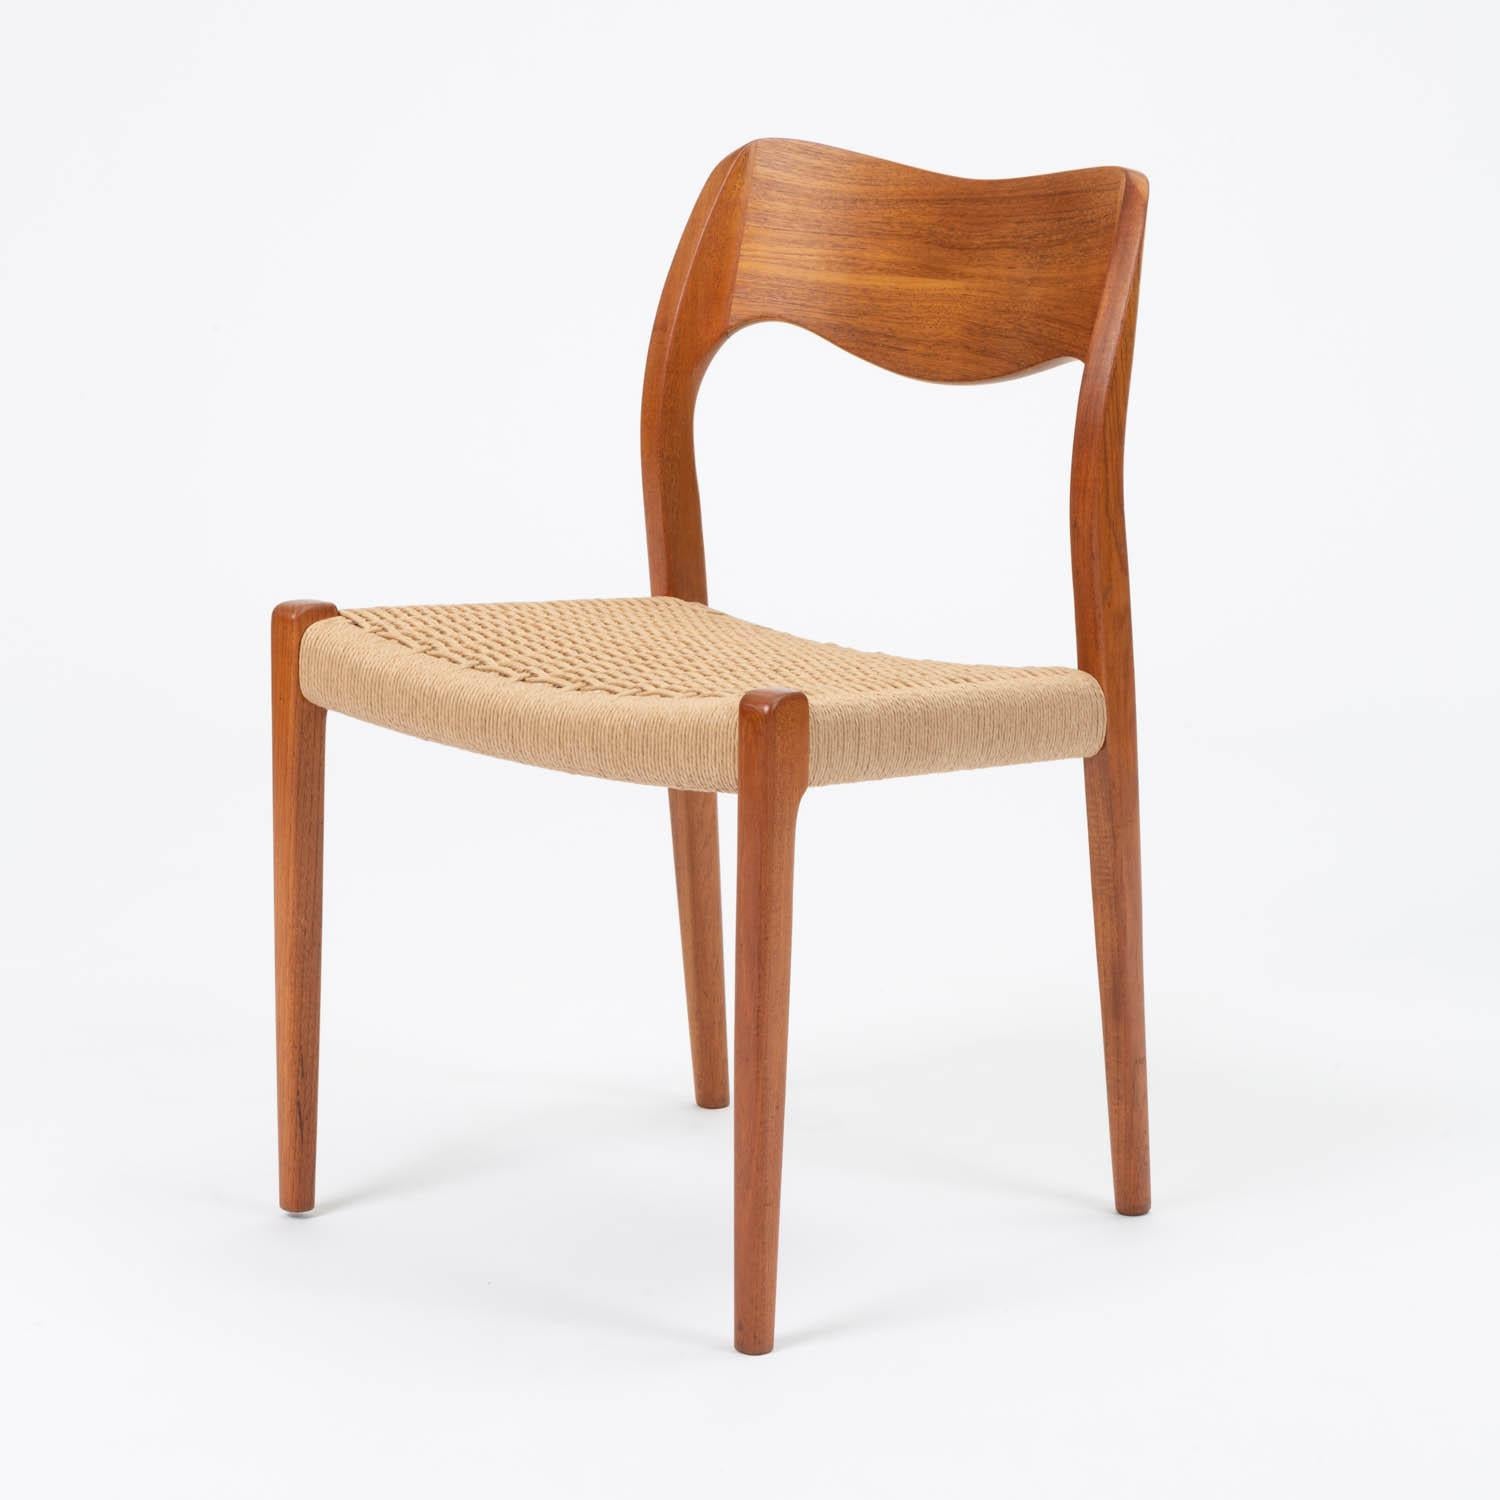 A single Niels Møller Model No. 71 dining chair in solid teak with Danish paper cord seat. Designed in 1951 and produced by J. L. Moller Mobelfabrik. The chair feature a solid wood frame that is impeccably shaped. Møller often spent up to five years